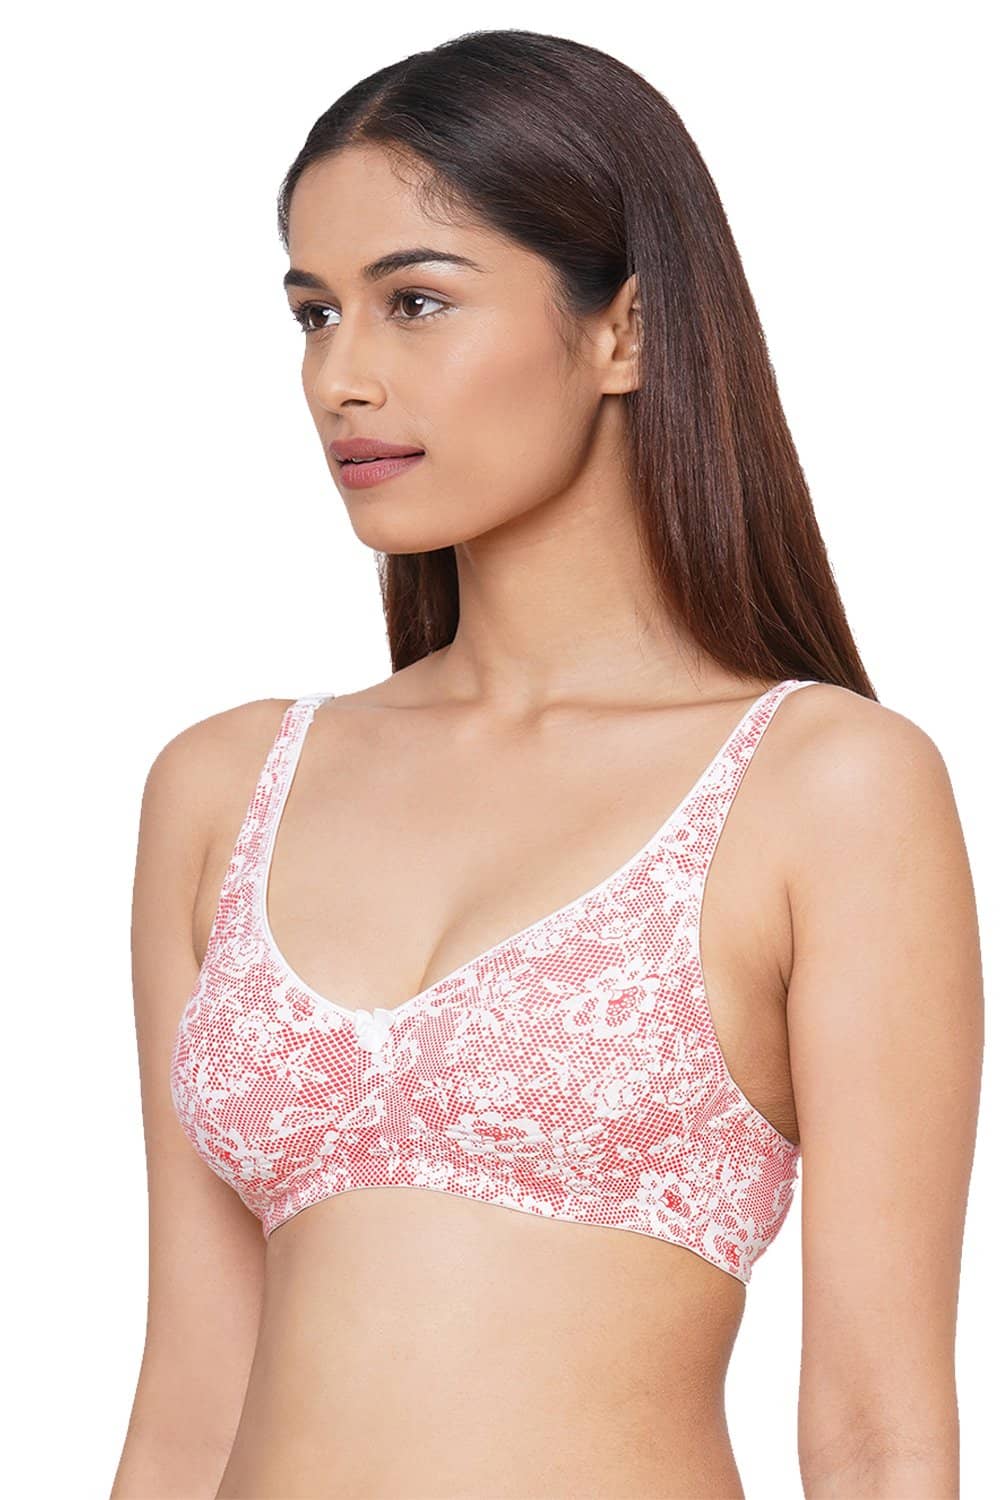 Organic Cotton  Antimicrobial  Seamless Side Support Bra (Pack of 2)-ISB057-Black_Pink Lace Print-